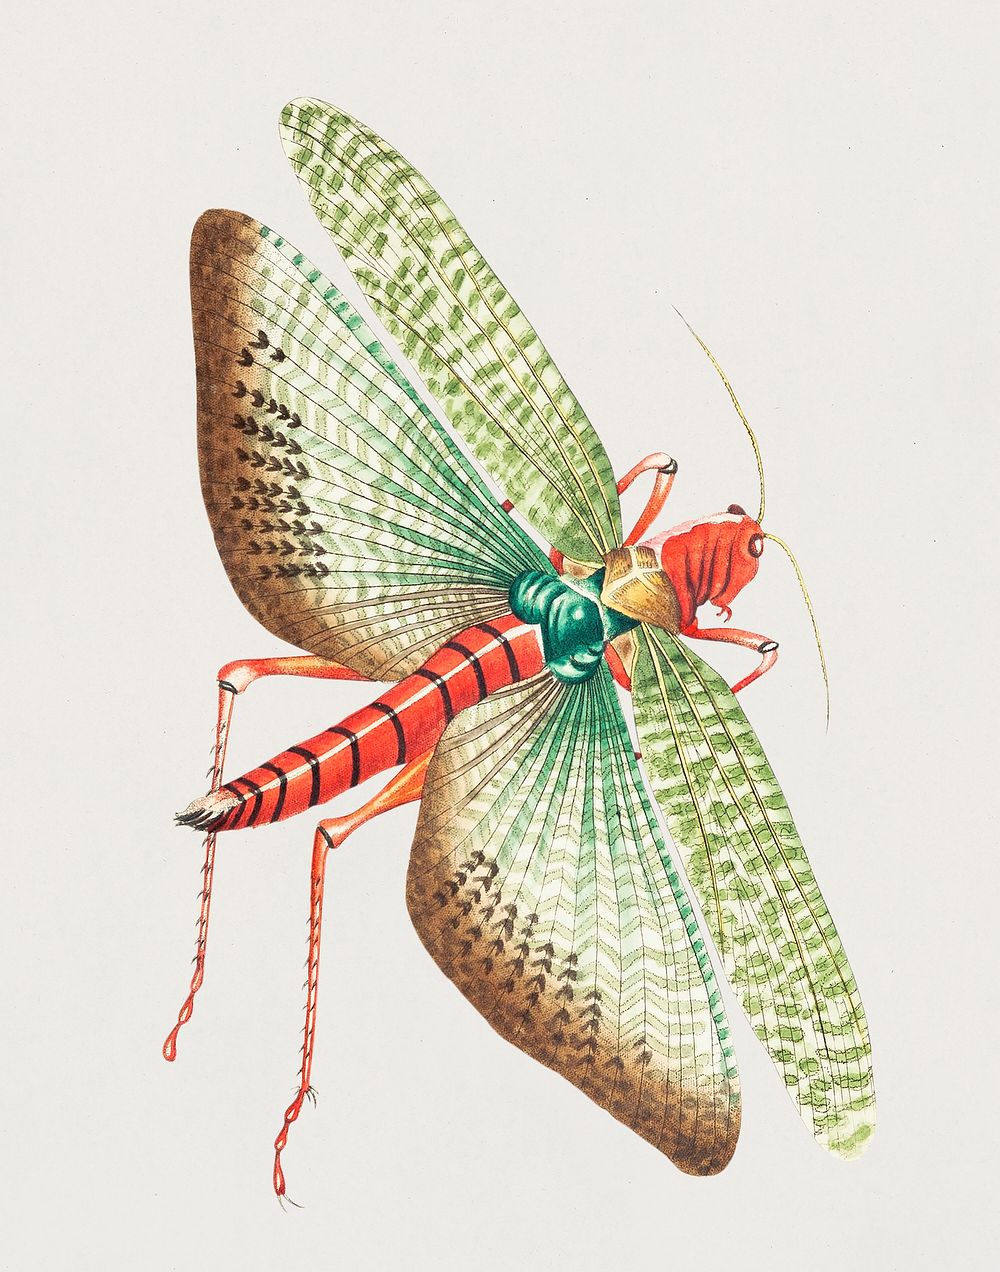 Egyptian locust illustration from The Naturalist's Miscellany (1789-1813) by George Shaw (1751-1813)